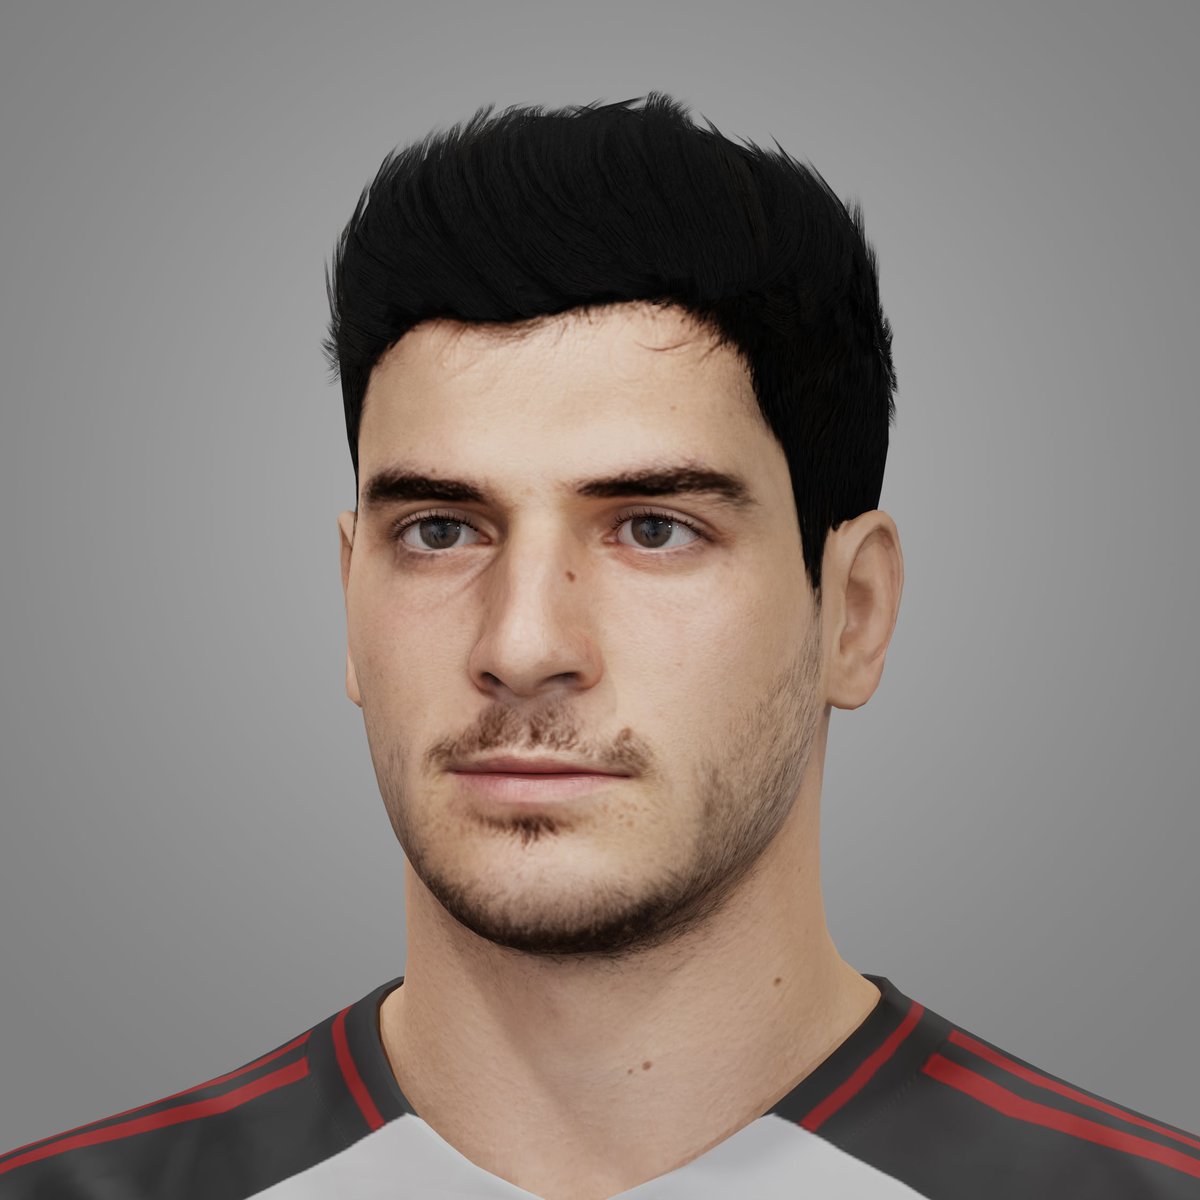 Fotis Ioannidis | RENDER PREVIEW

📇 Contact me for personal face or request!

#nerwin64 #fifa23 #fc24 #fifafaces #fifaMods #nextgen